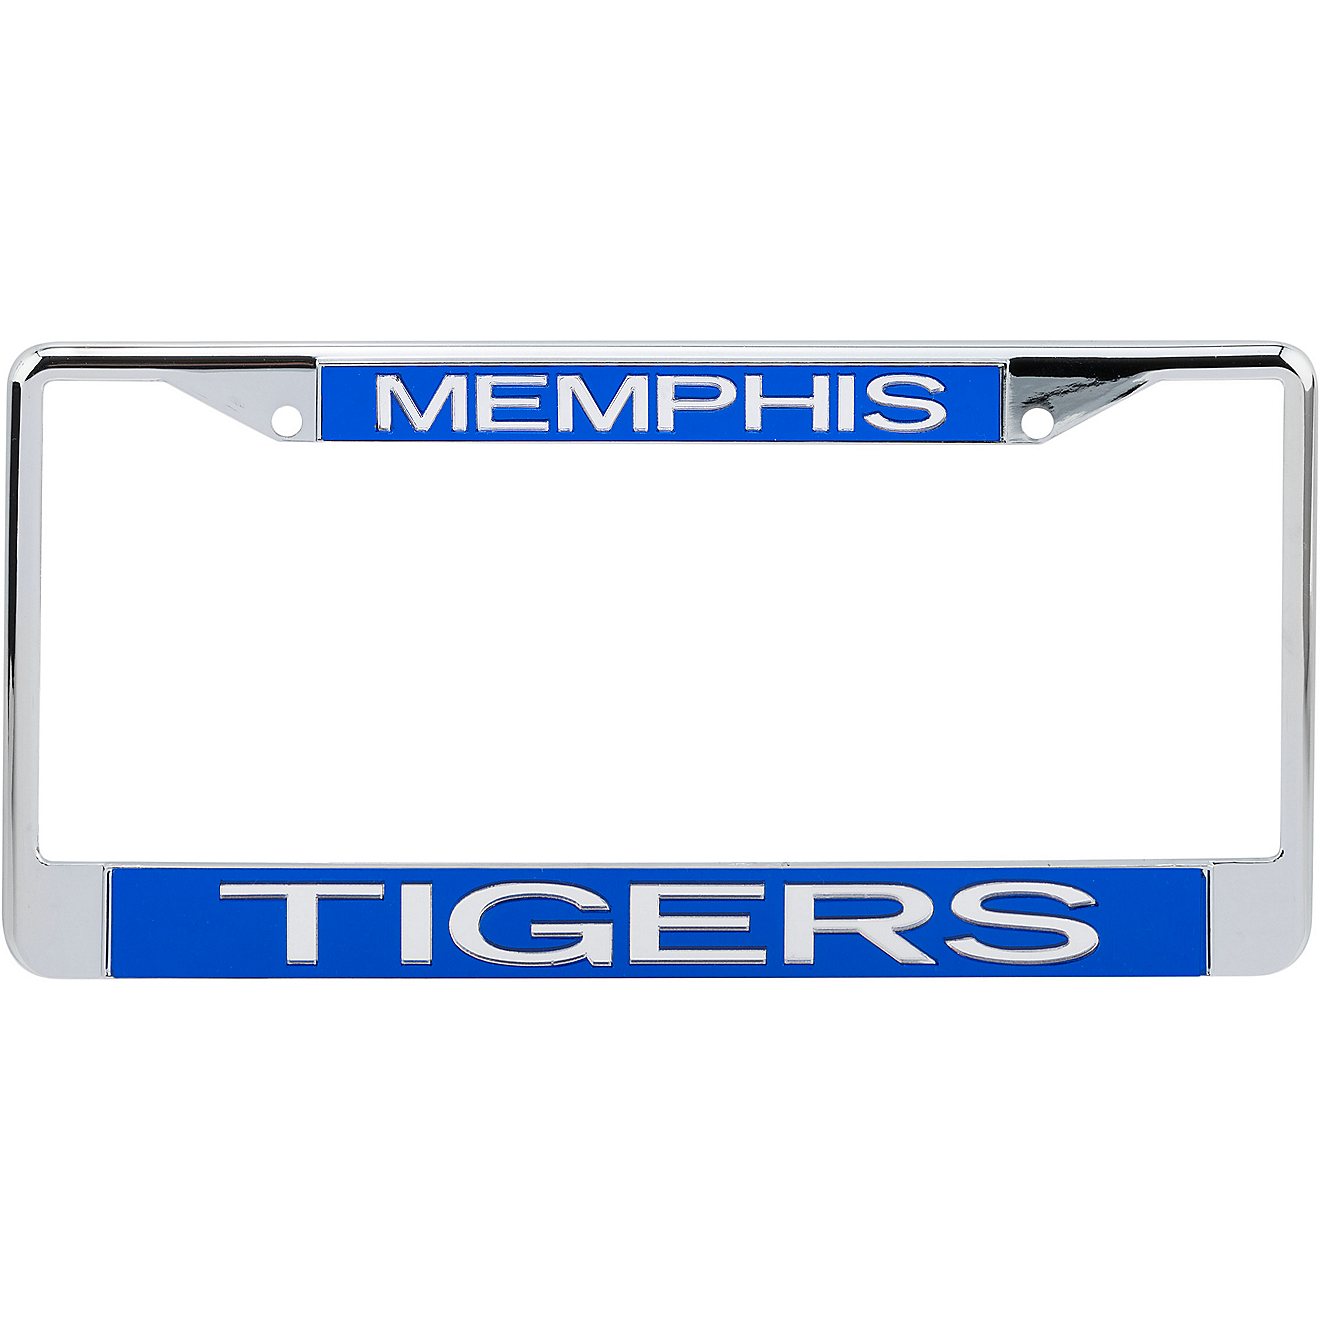 Stockdale University of Memphis Mirror License Plate Frame                                                                       - view number 1